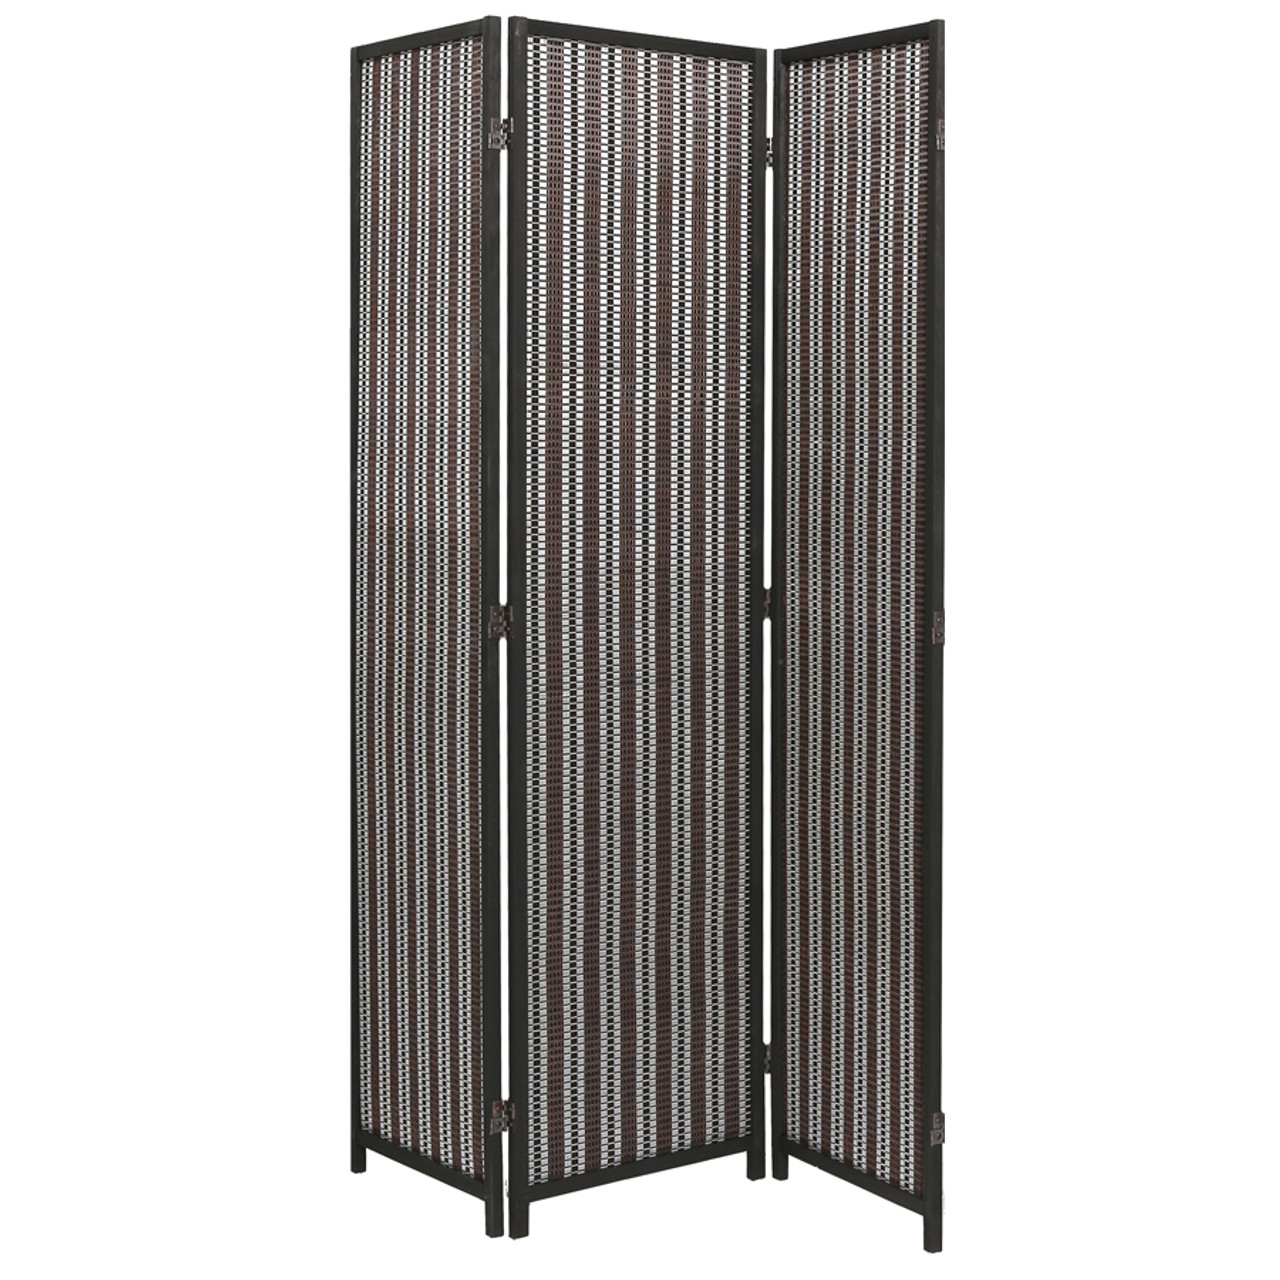 3 Panel Natural, Brown, or Black Color Wood and Bamboo Weave Room Divider